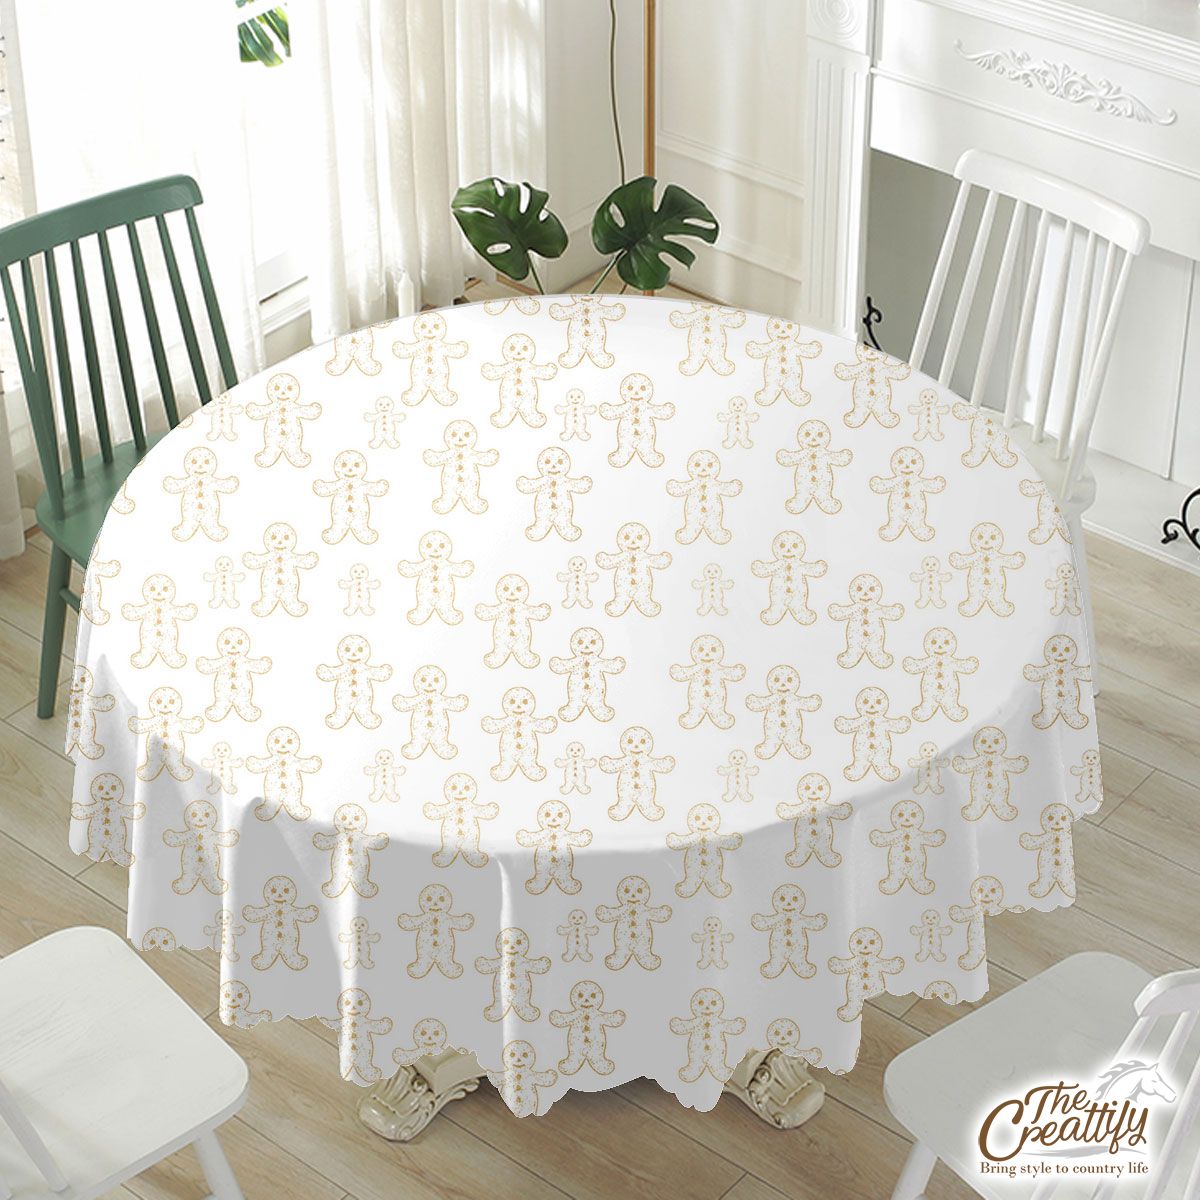 Christmas Gold Gingerbread Man On White Background Waterproof Tablecloth